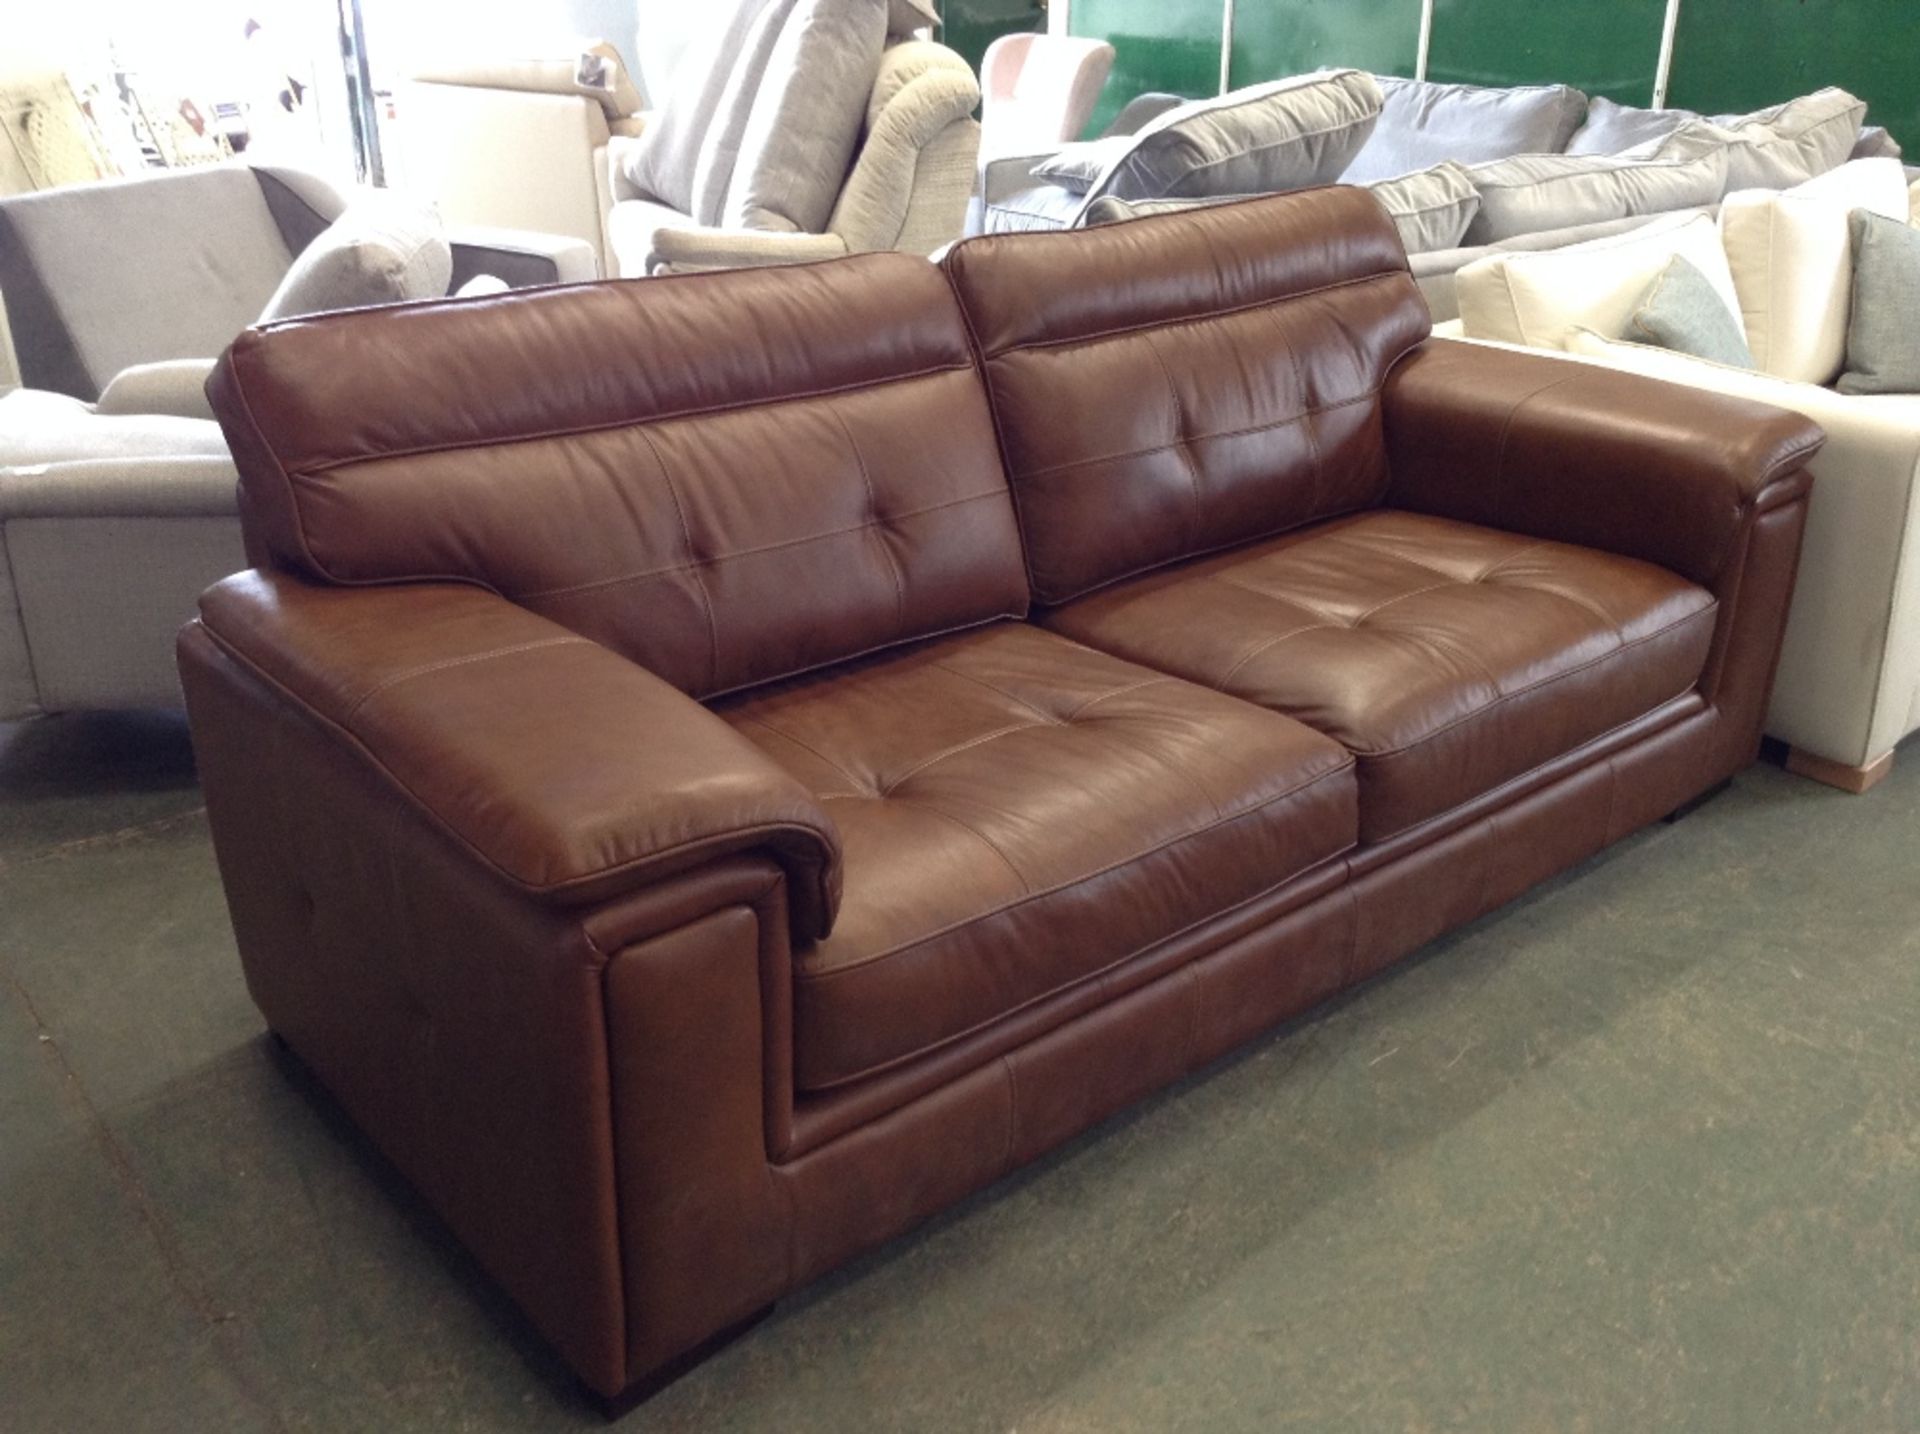 BROIWN LEATHER WUTH WHITE STITCHING 3 SEATER SOFA